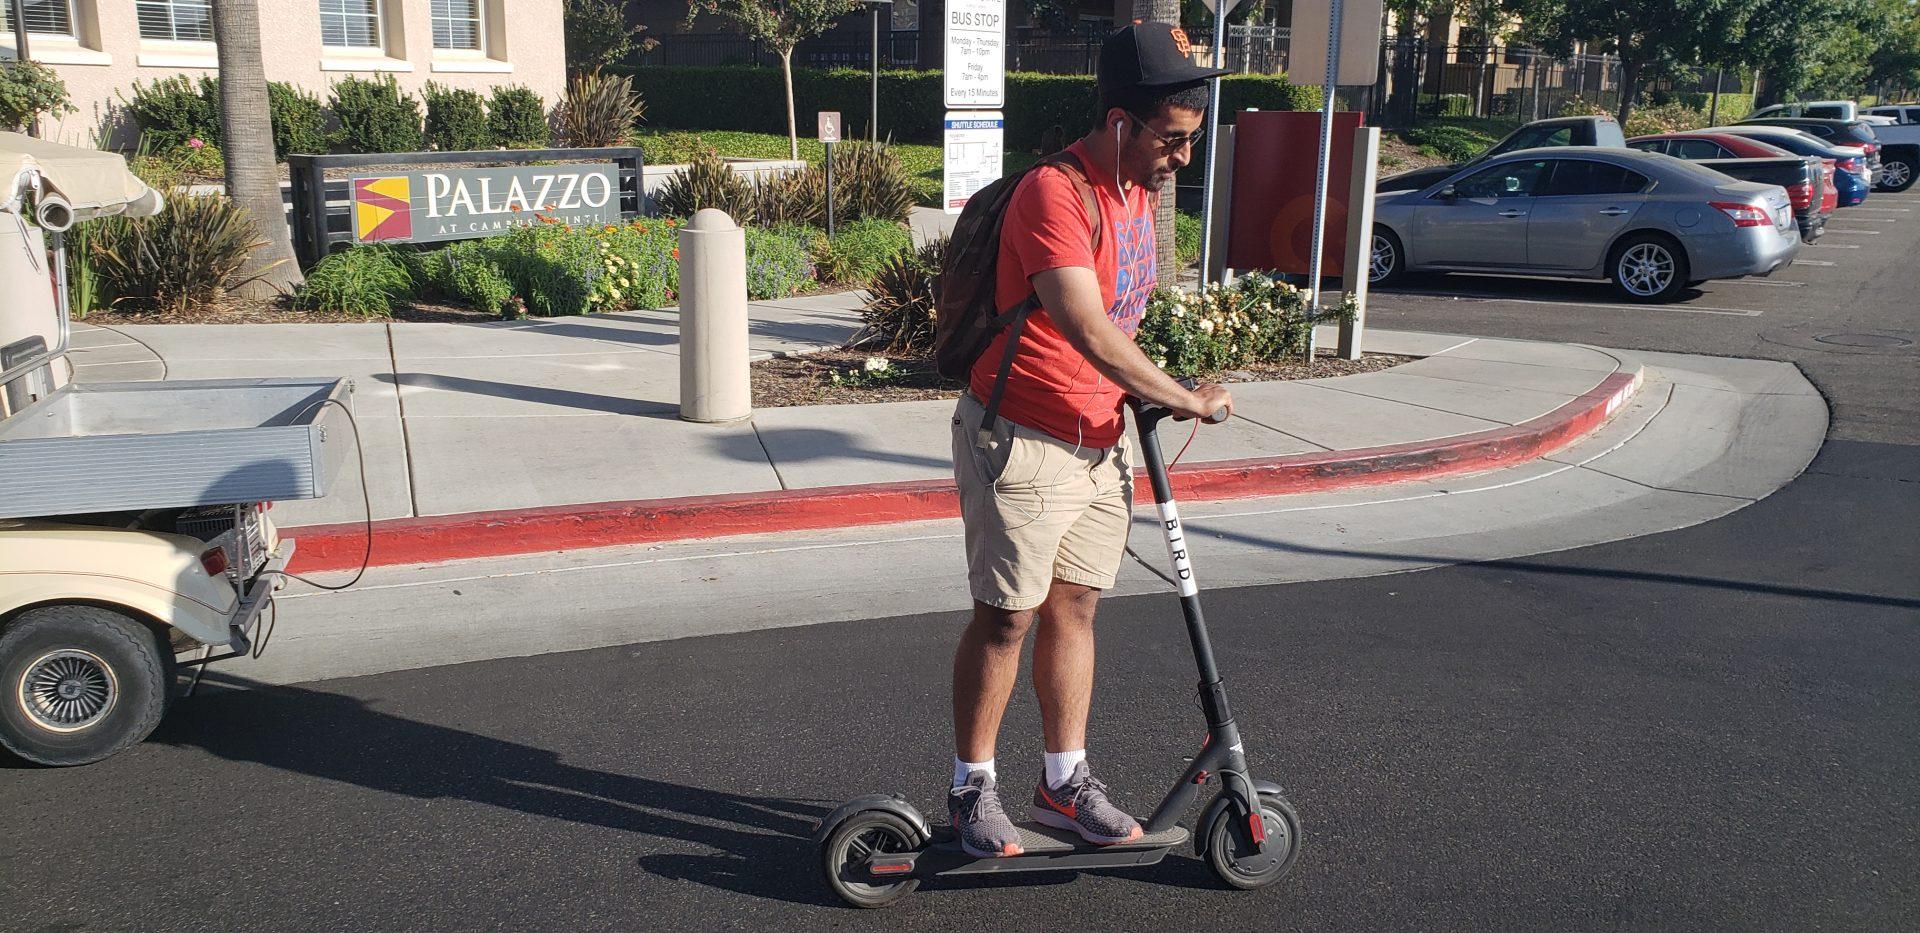 A Fresno State sophomore rides a Bird scooter outside the Palazzo at Campus Pointe on Sept. 7. The City of Fresno announced it issued a cease and desist order to the scooter company. (Seth Casey/The Collegian) 